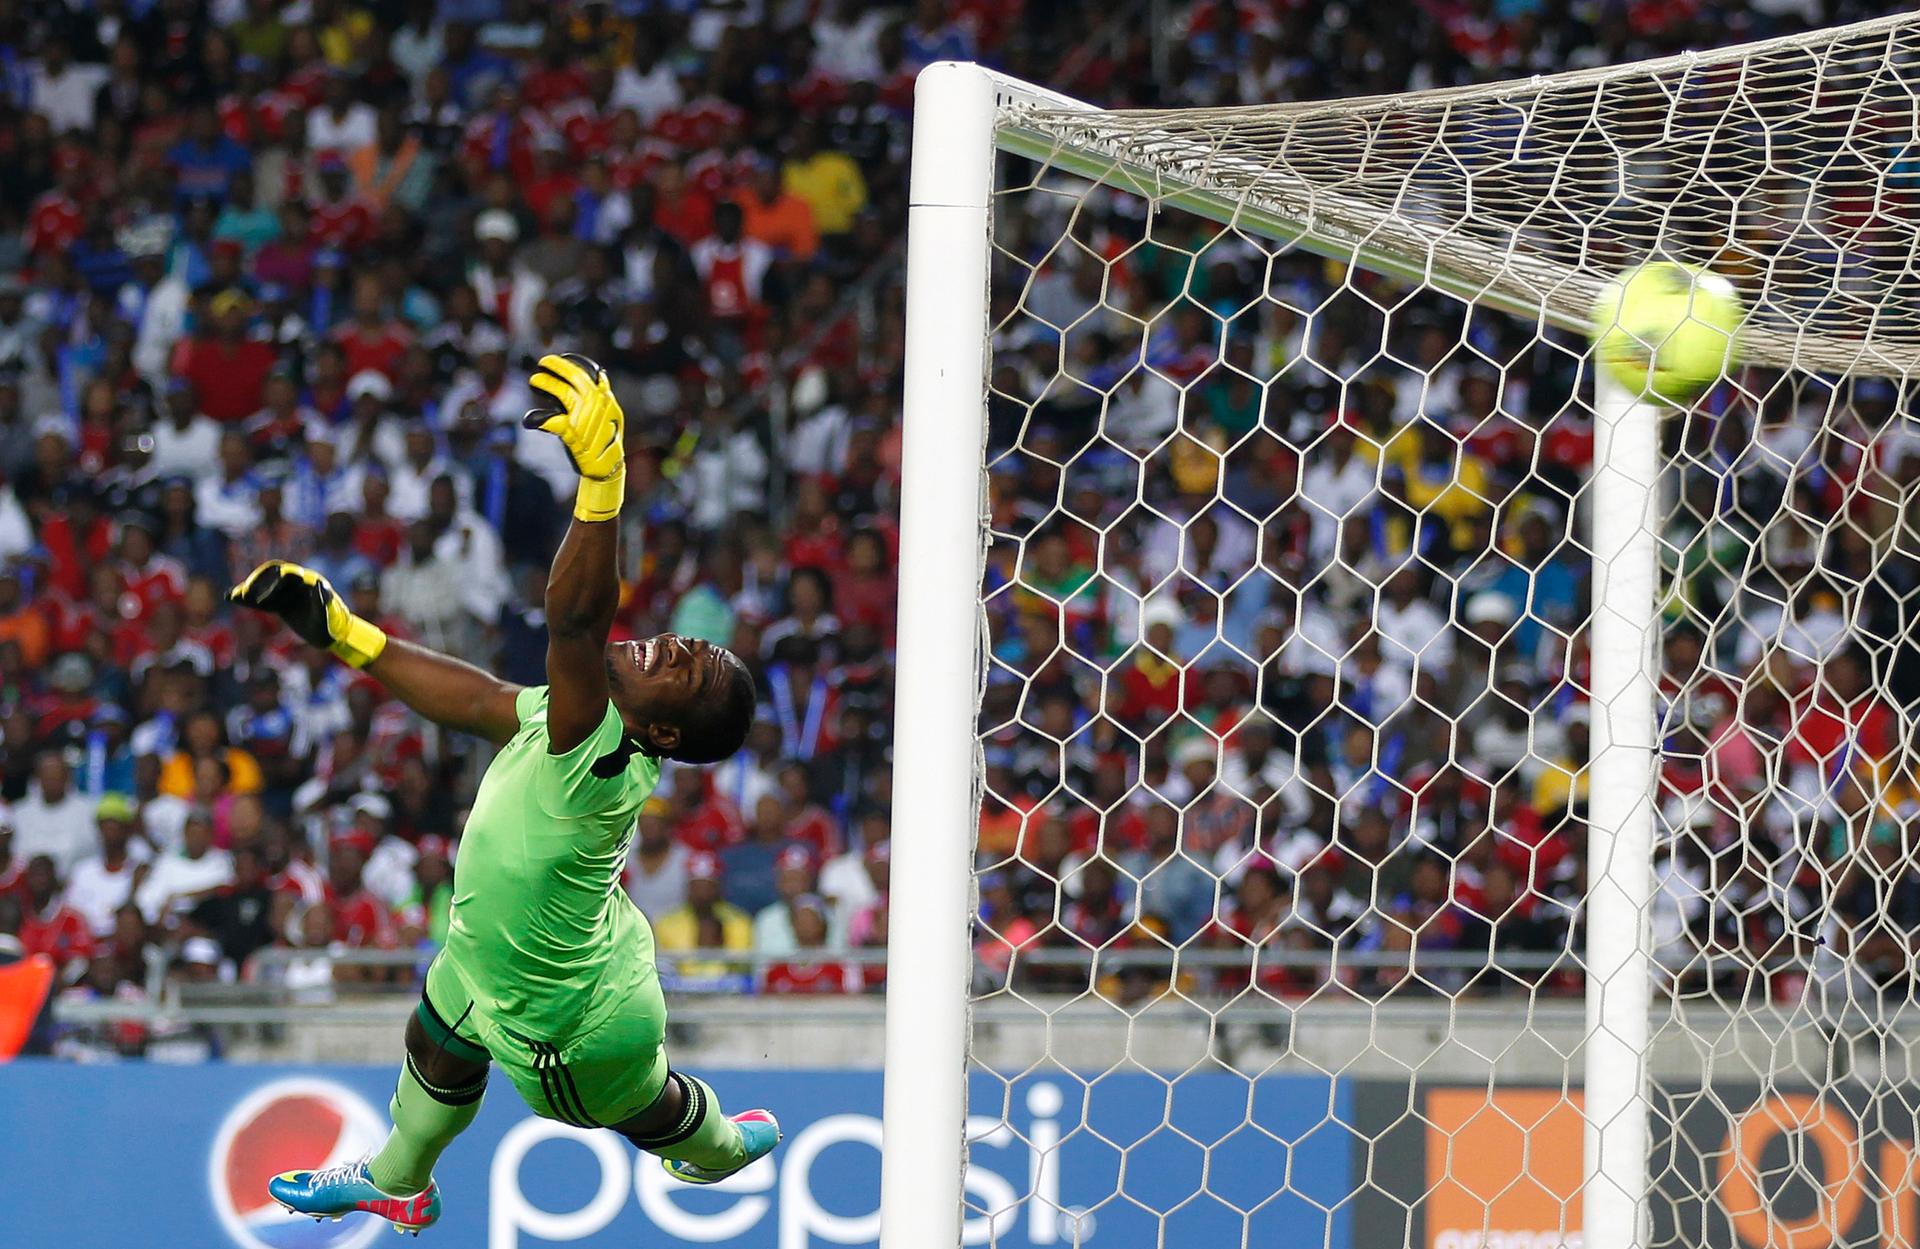 Goalkeeper Senzo Meyiwa of South Africa's Orlando Pirates is beaten by a shot from Mohamed Aboutrika of Egypt's Al Ahli at Orlando Stadium in Soweto on November 2, 2013.